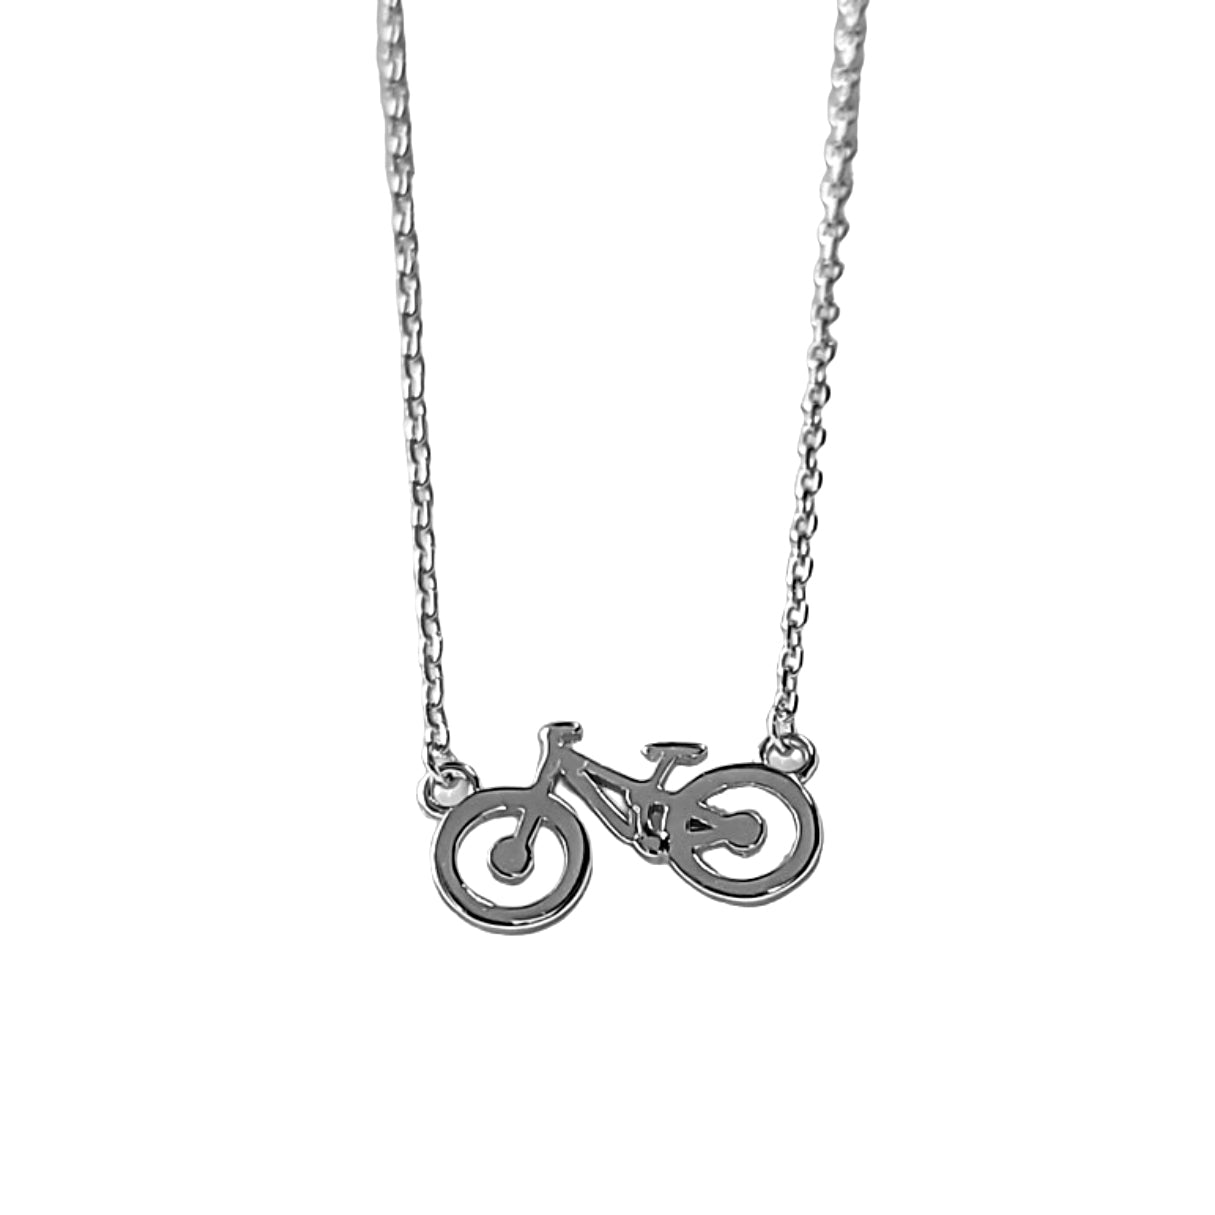 rhodium plated sterling silver gold  bike necklace with adjustable gold chain. mountain bike inspired necklace